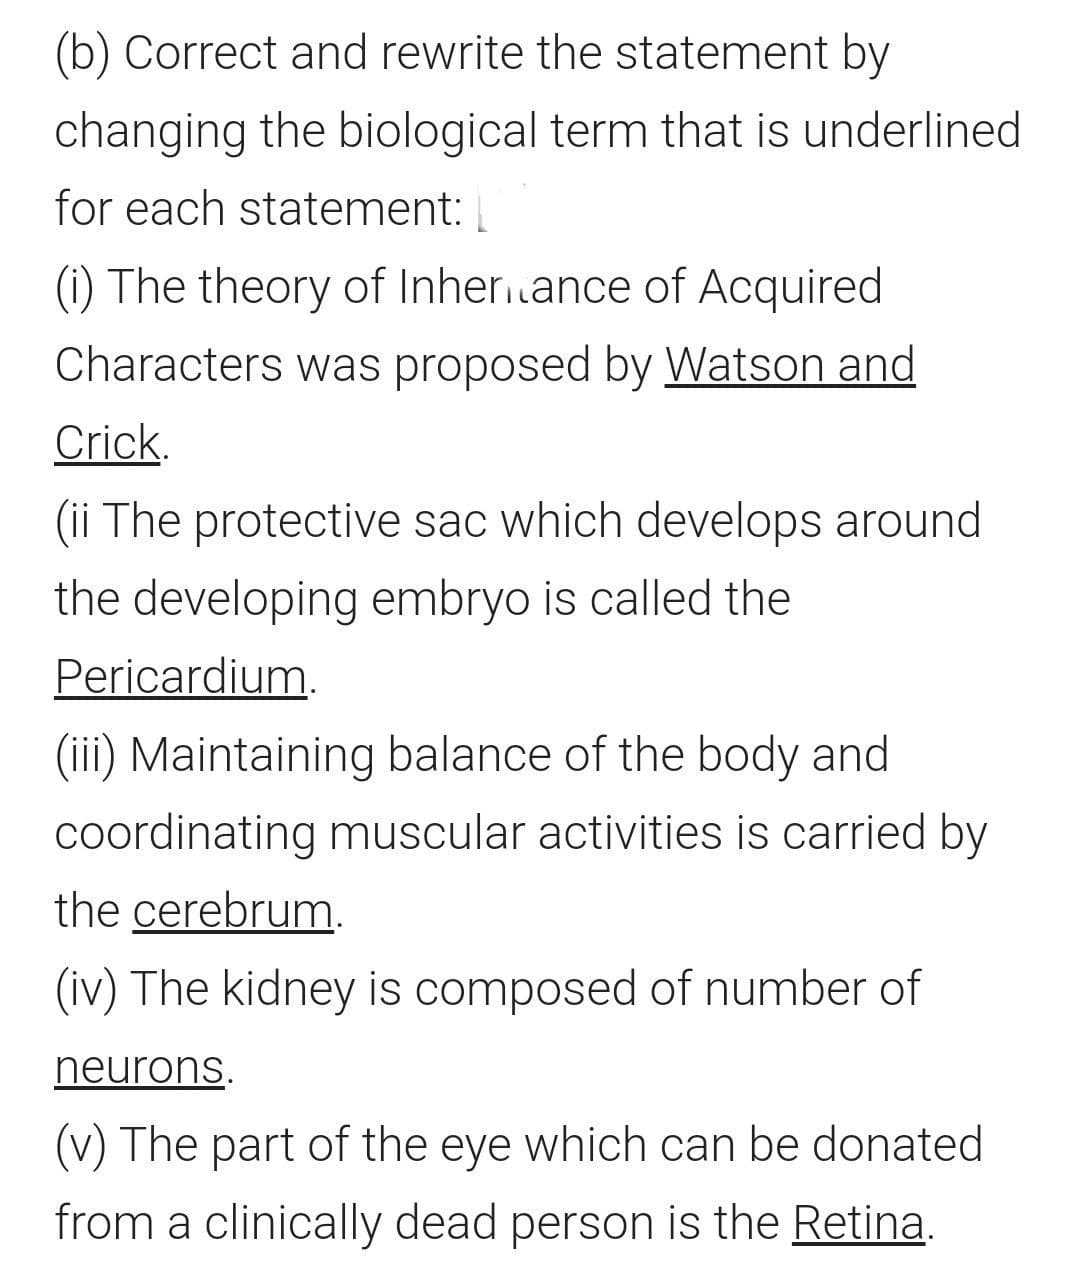 (b) Correct and rewrite the statement by
changing the biological term that is underlined
for each statement:
(i) The theory of Inher.ance of Acquired
Characters was proposed by Watson and
Crick.
(ii The protective sac which develops around
the developing embryo is called the
Pericardium,
(iii) Maintaining balance of the body and
coordinating muscular activities is carried by
the cerebrum.
(iv) The kidney is composed of number of
neurons.
(v) The part of the eye which can be donated
from a clinically dead person is the Retina.
